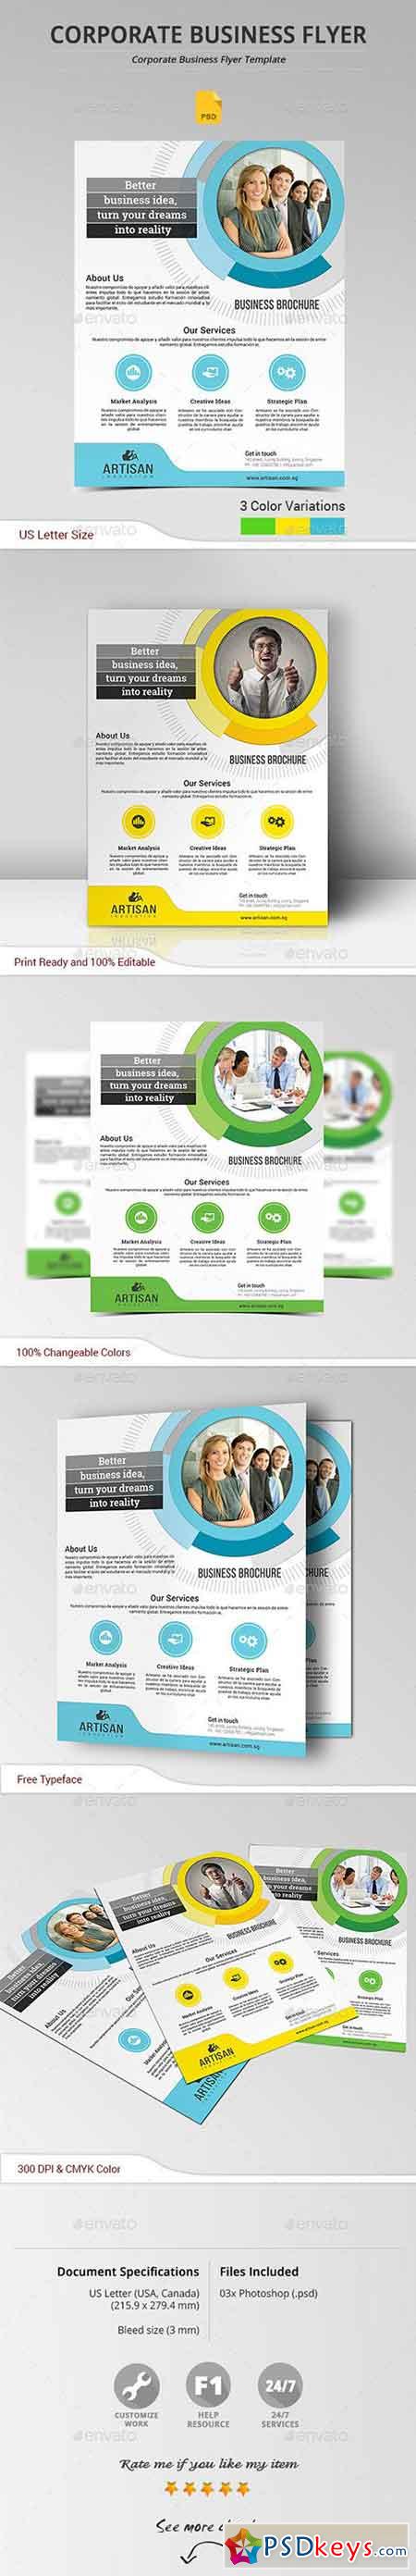 Corporate Business Flyer 11663957